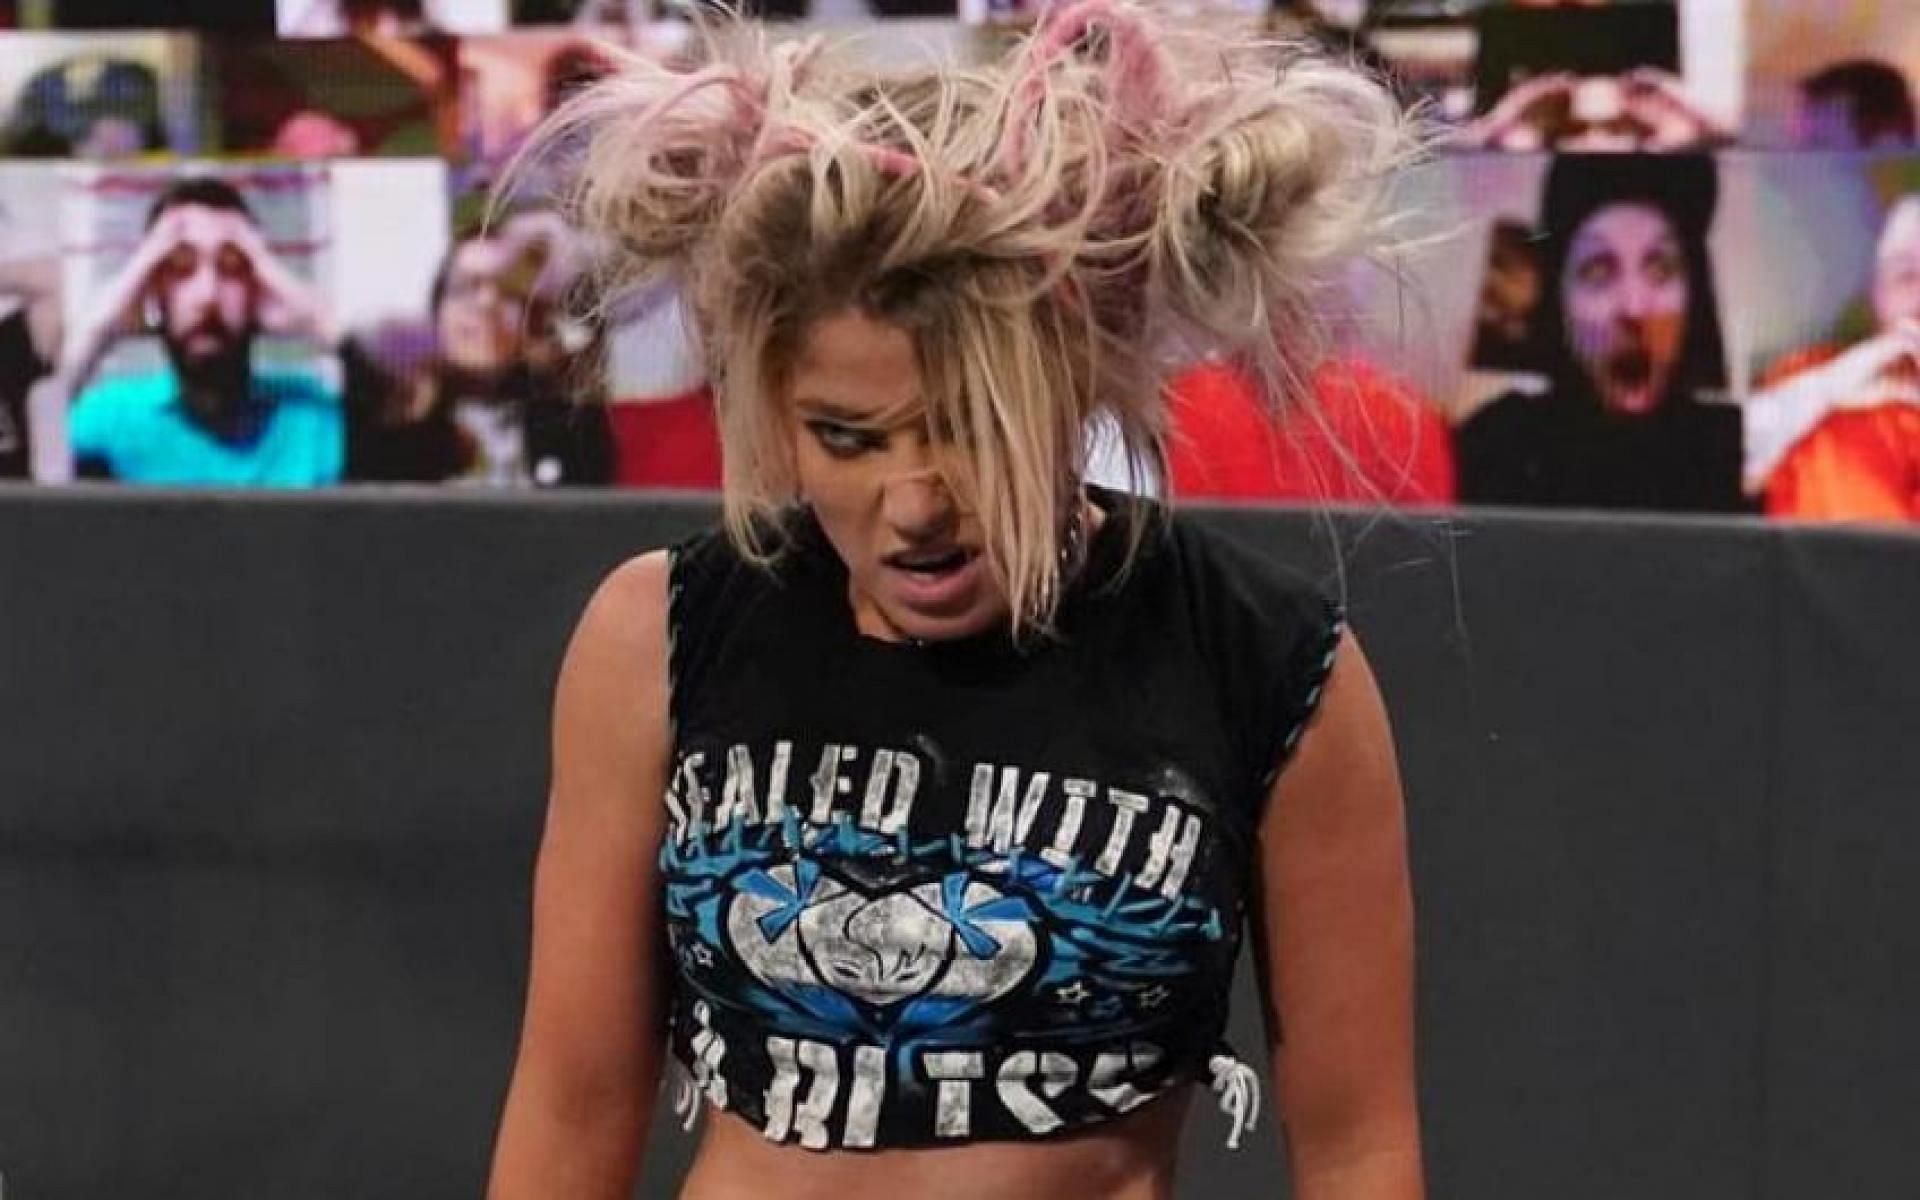 Things might not go well for Little Miss Bliss tonight on WWE RAW.